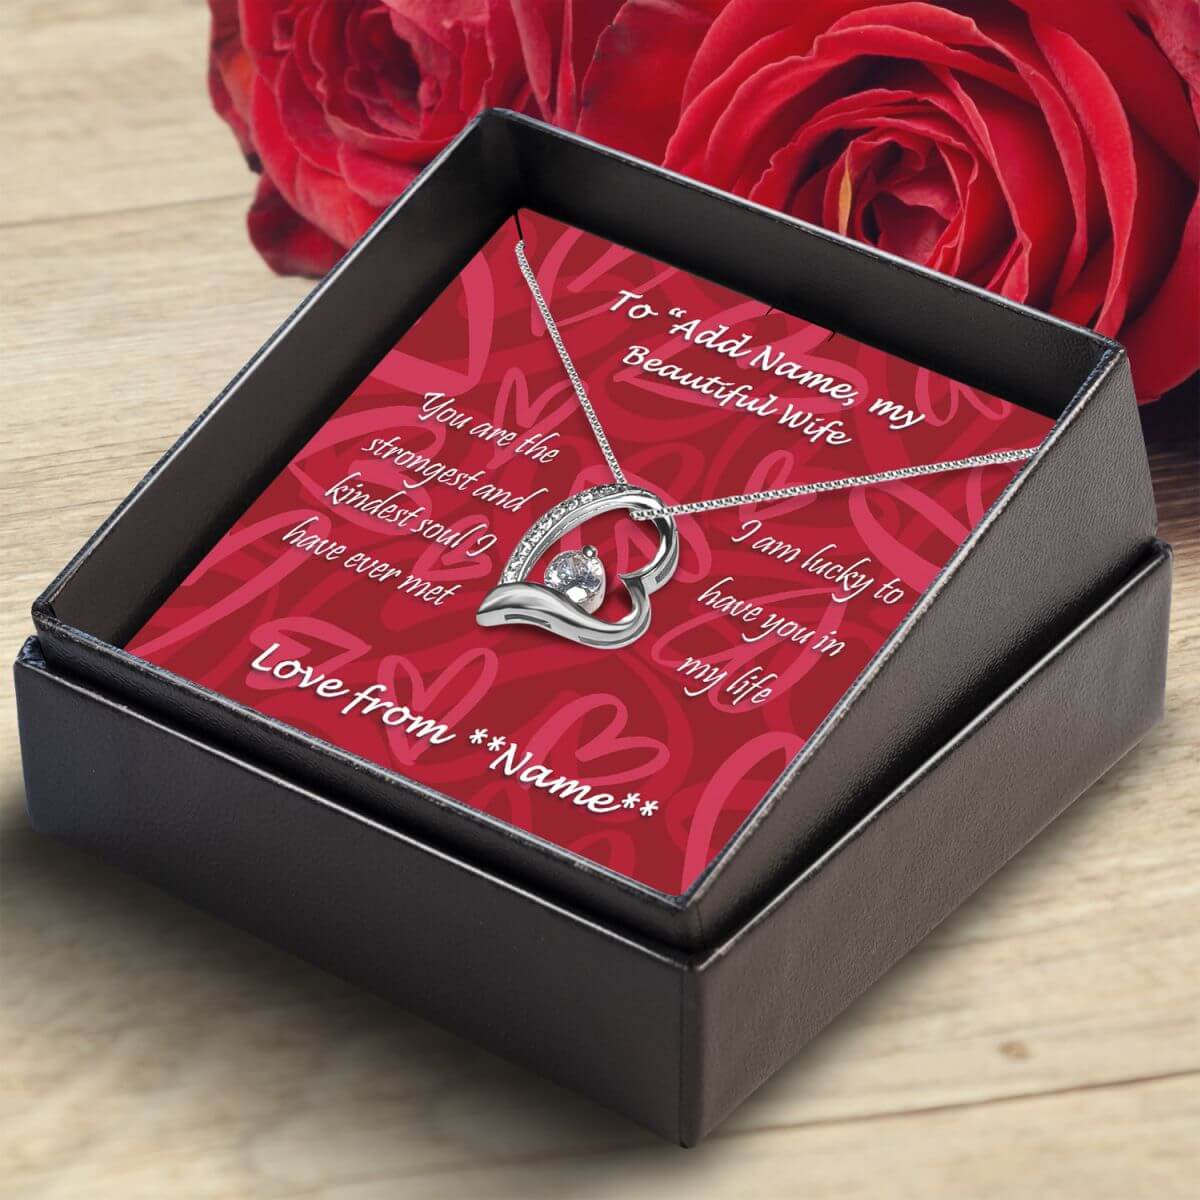 Necklace-Box-angled-Eternal-Heart-Beautiful-Wife-personalised - BIG ON Jewellery, BIG ON Necklaces